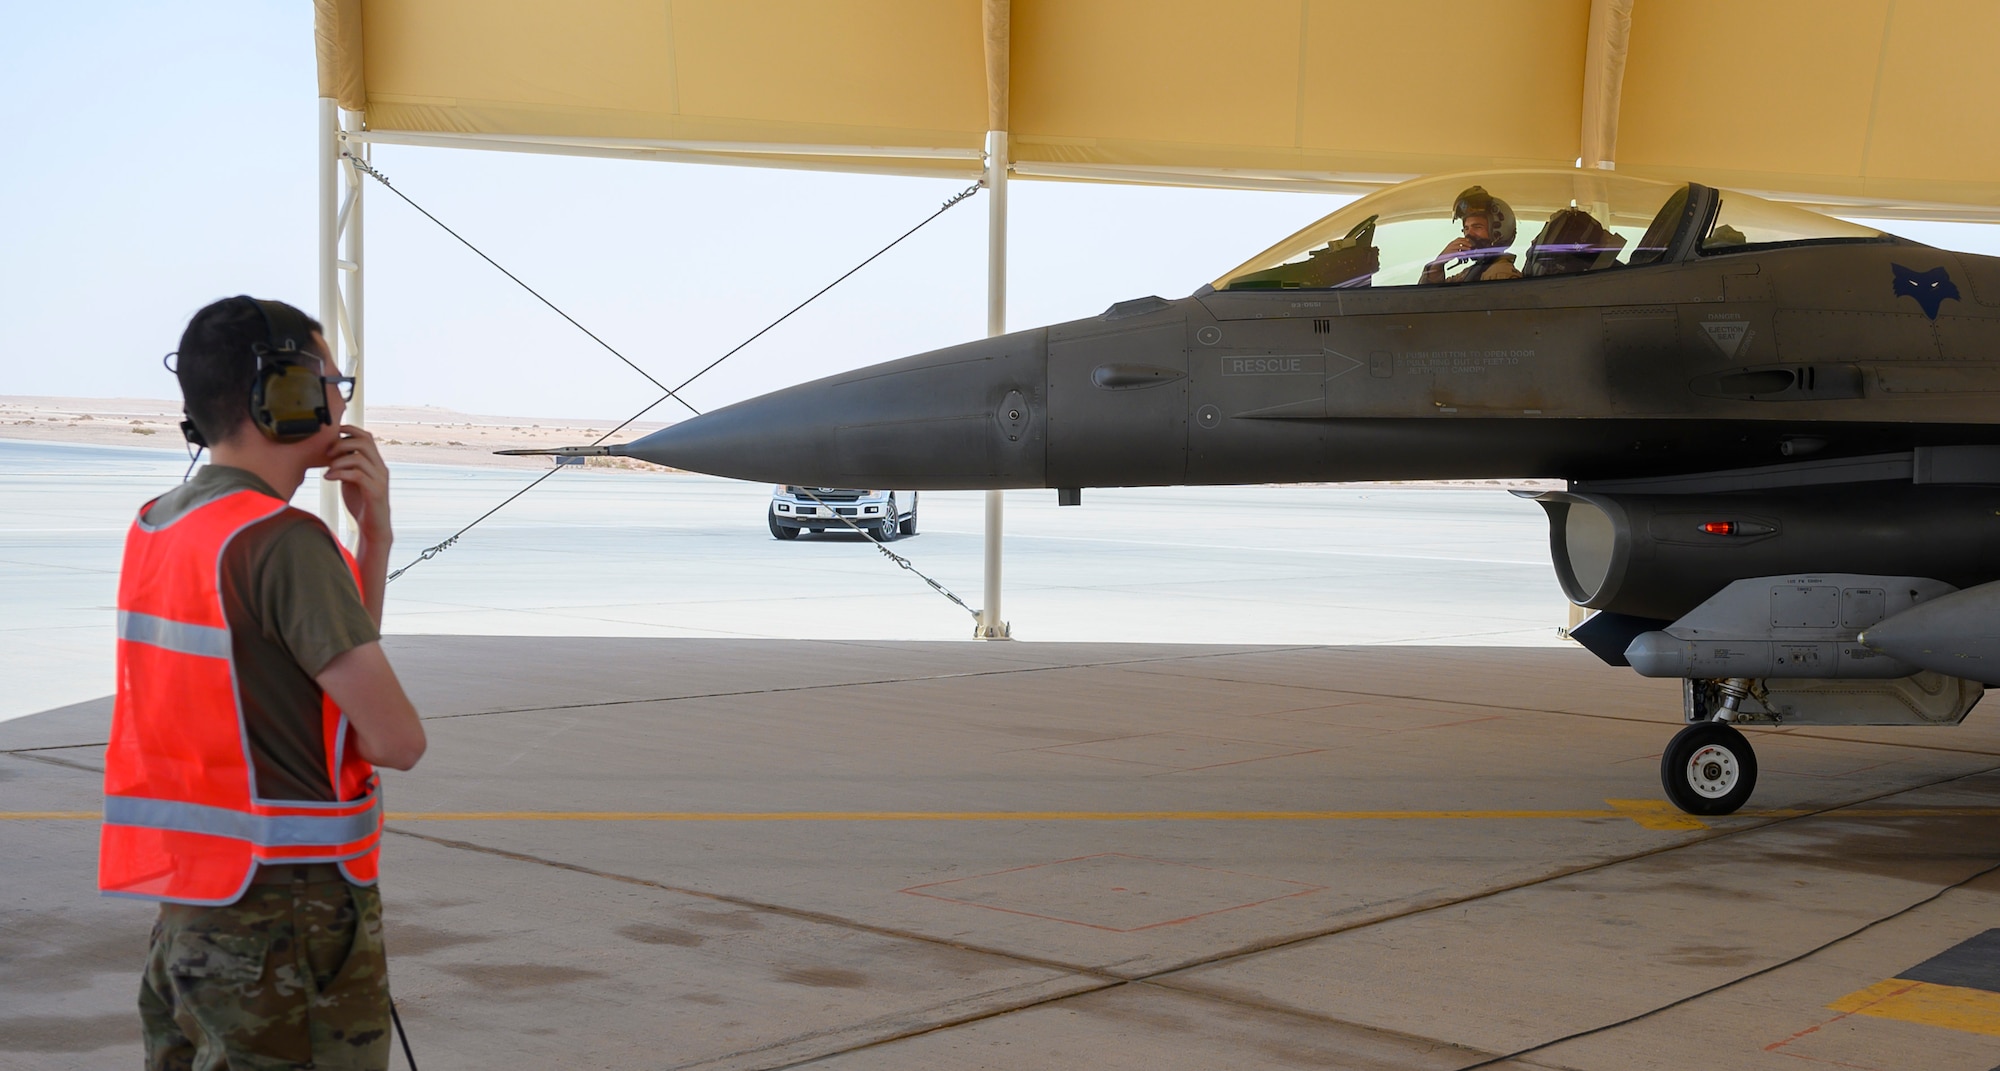 Senior Airman Christopher Adkins, 379th Expeditionary Maintenance Squadron B-1 crew chief, talks to a pilot, 157th Expeditionary Fighter Squadron, during “hot pit” training, Prince Sultan Air Base, Kingdom of Saudi Arabia, May 3, 2021. Hot pit refueling is where maintainers refuel an aircraft while the engine is still running, allowing the aircraft to safely and quickly return to flying. (U.S. Air Force Photo by Senior Airman Samuel Earick)